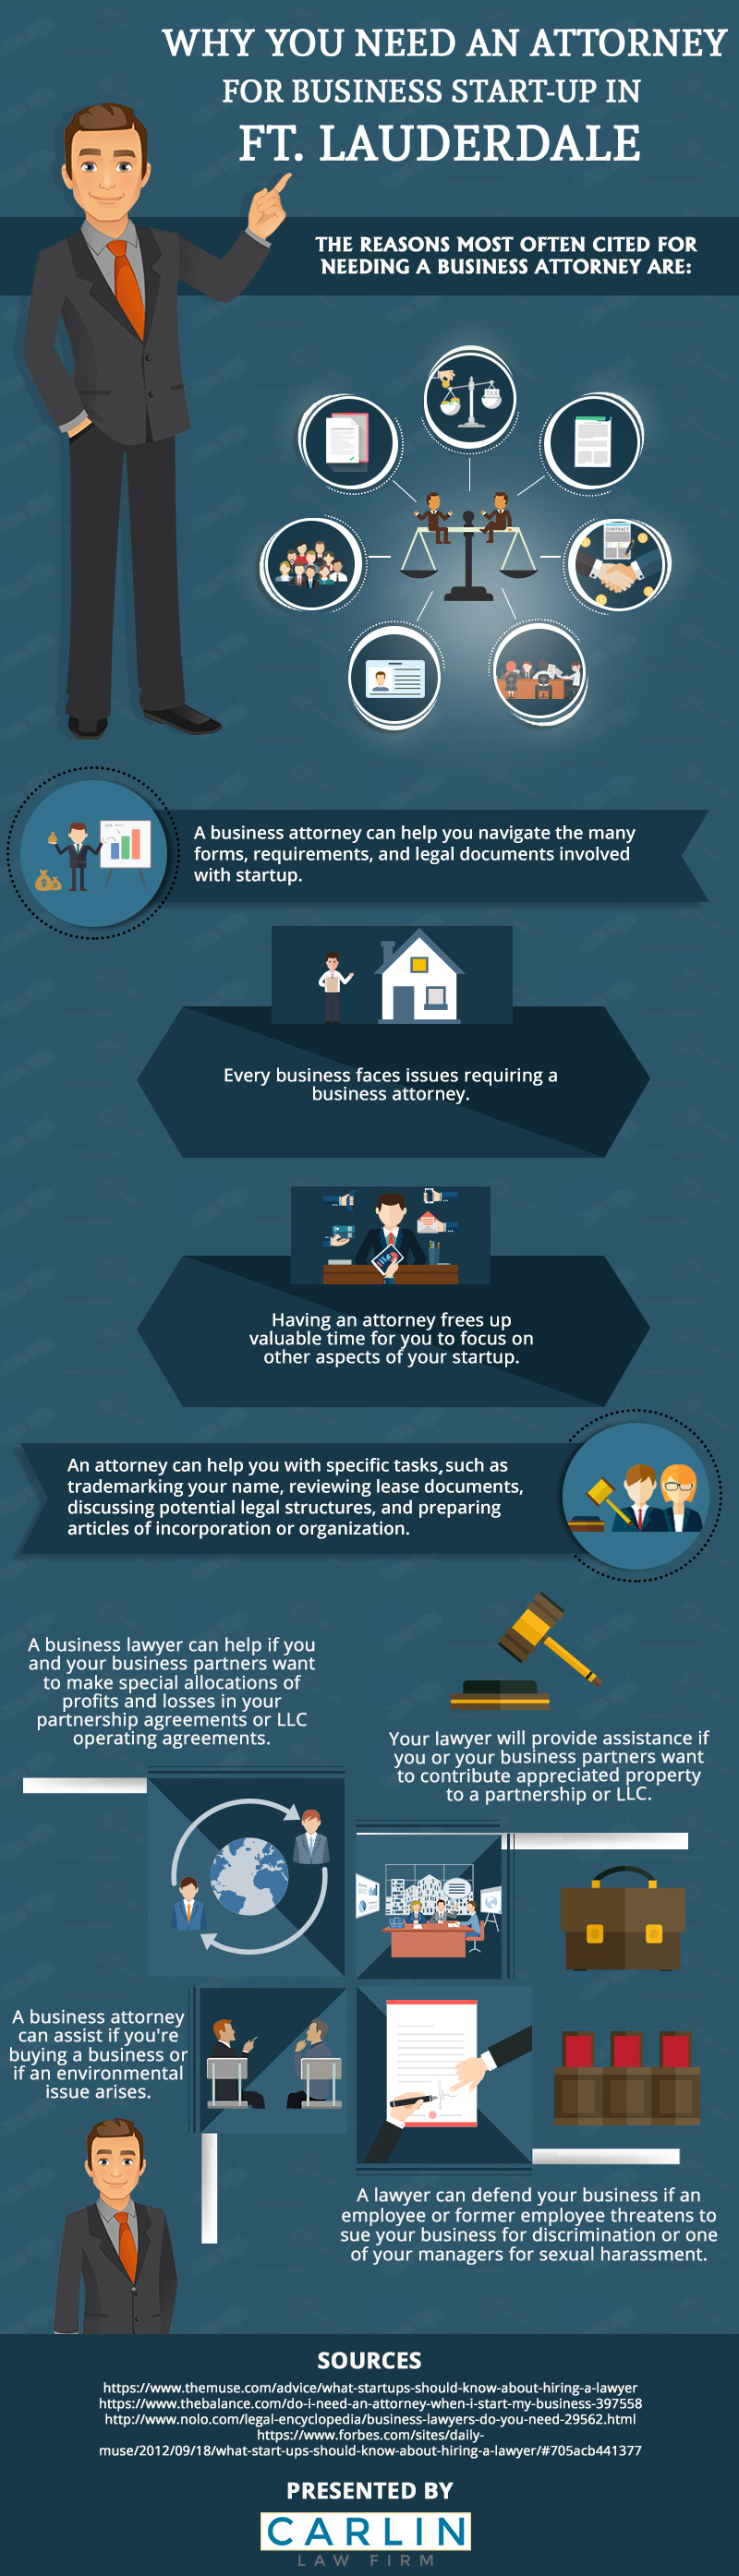 Reasons for Hiring a Business Attorney